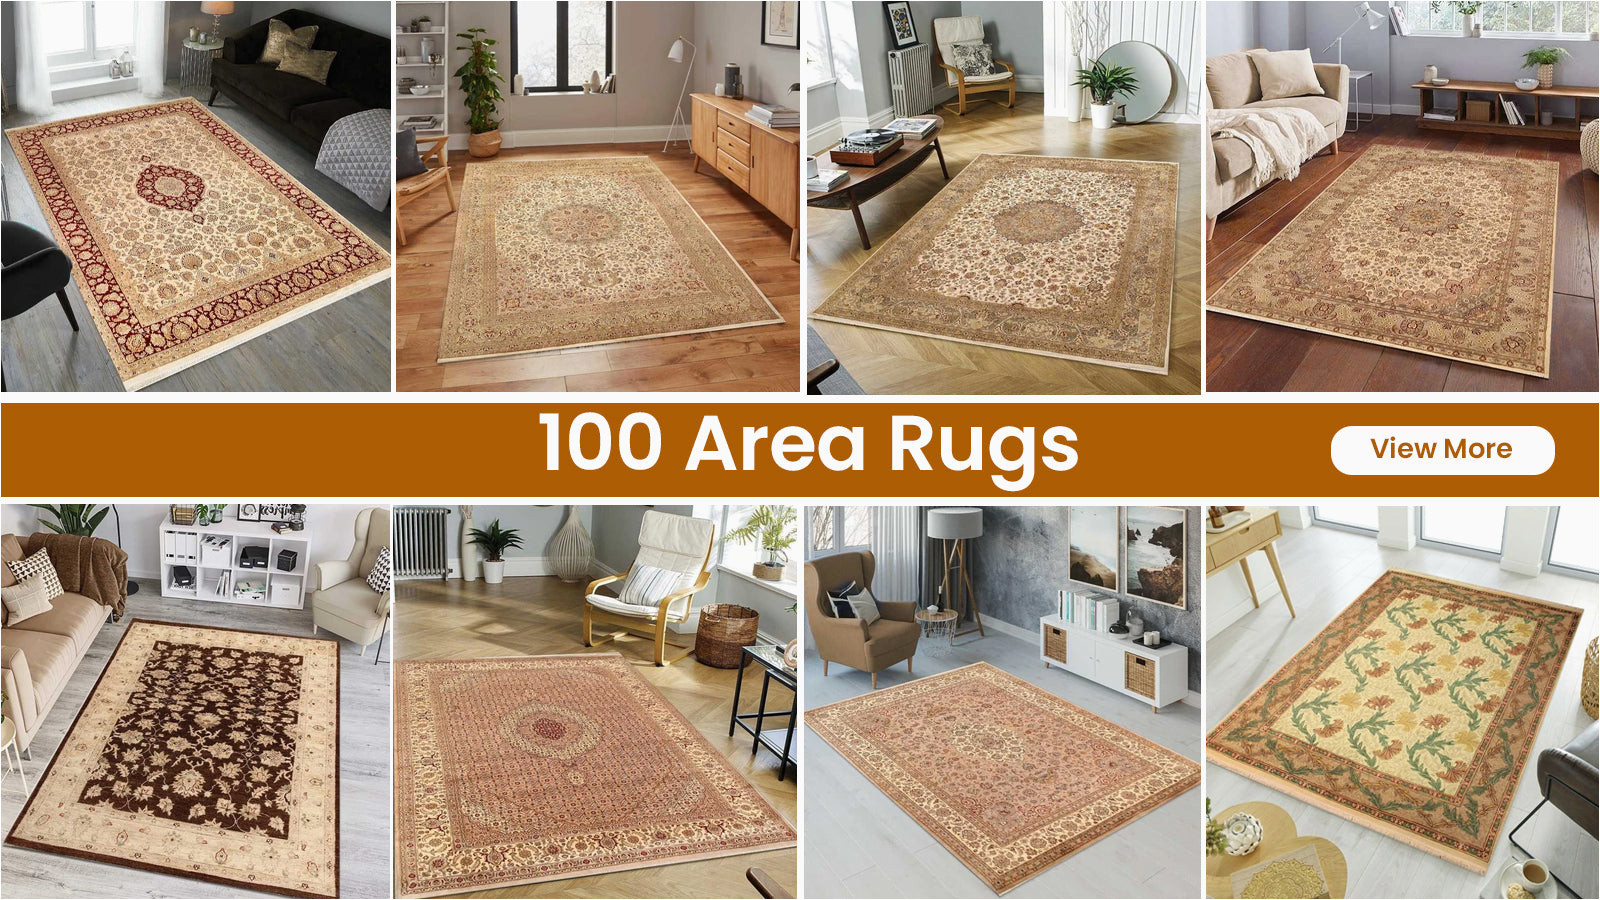 Who Cleans area Rugs Near Me Professional Rug Cleaning – Cost Breakdown – Rugknots